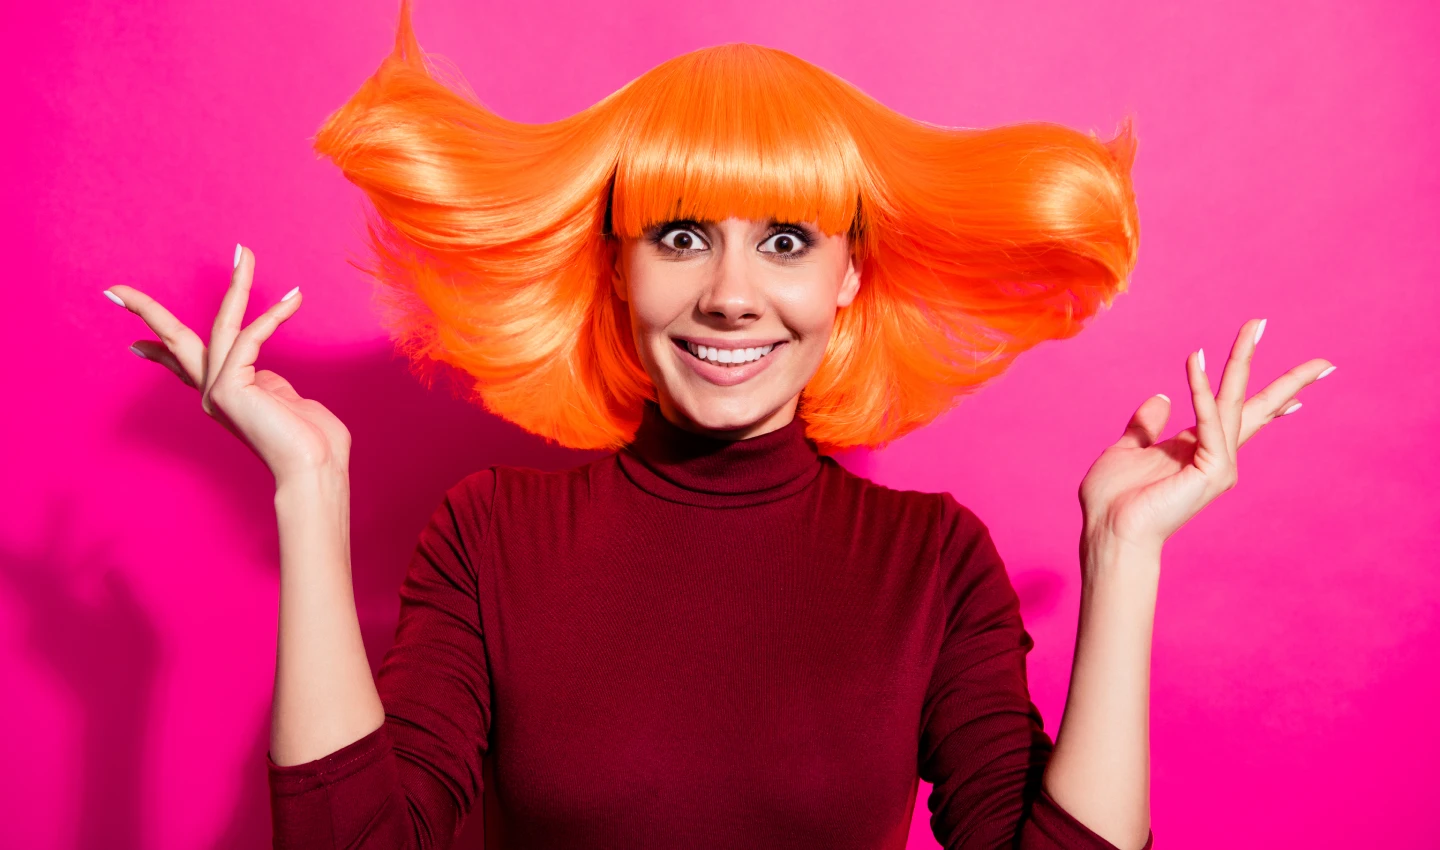 A woman with vibrant orange hair looks happy and confident, showcasing the transformative power of bold hair hues for a striking new look.